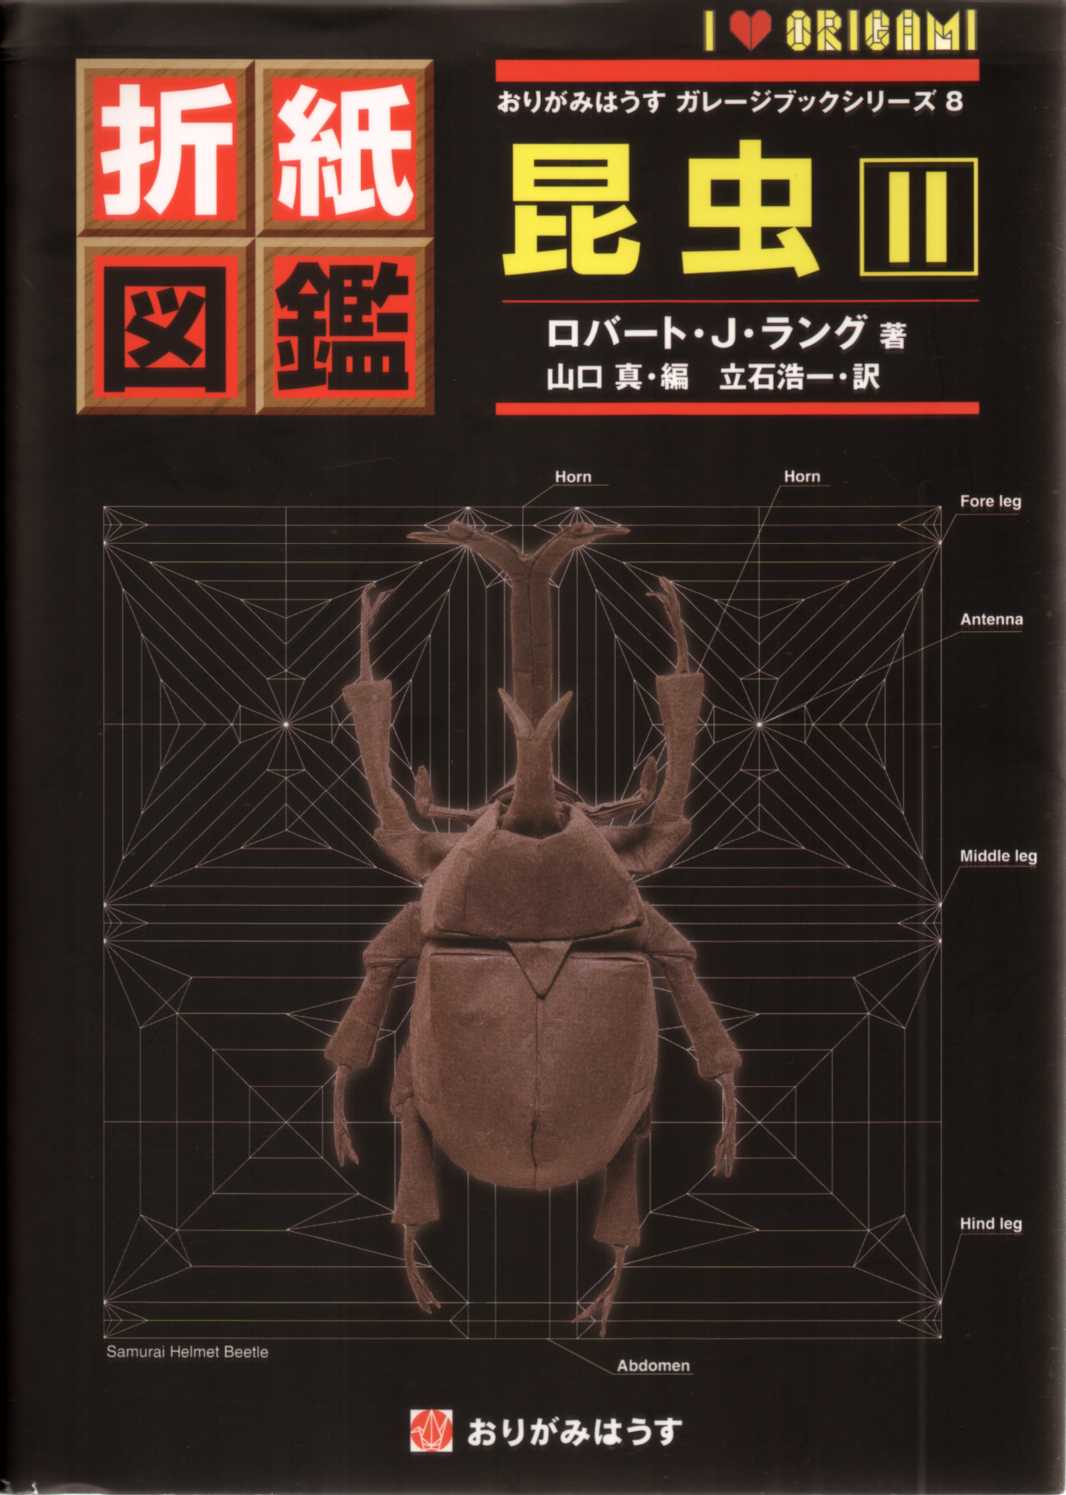 Origami Insects II / 折紙図鑑　昆虫・2 : page 38.